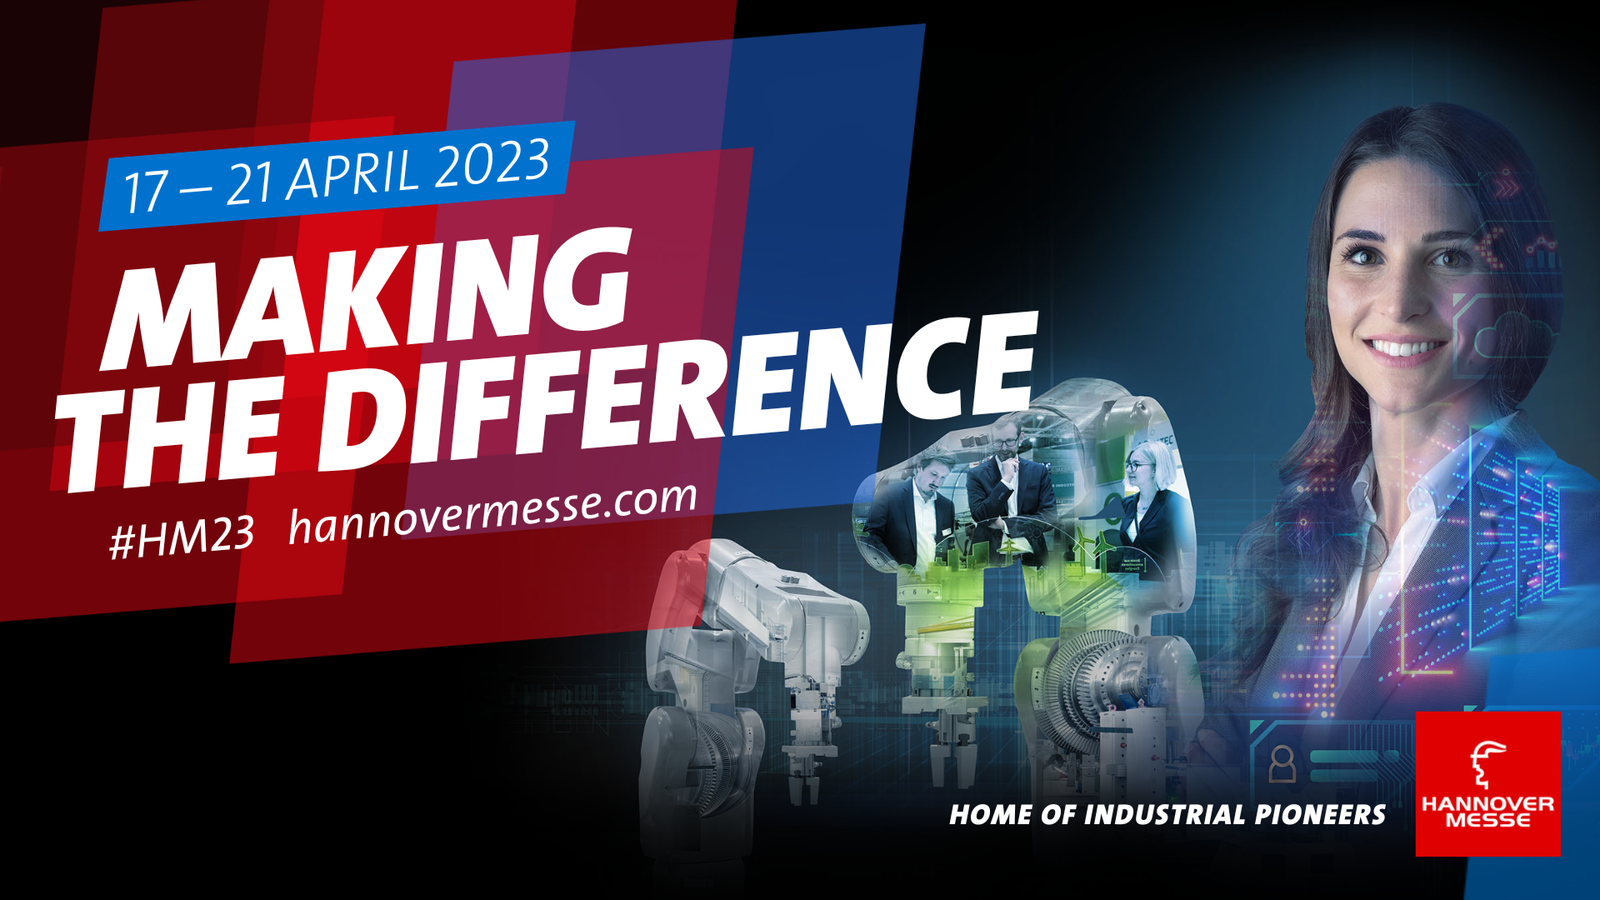 Visit IIP-Ecosphere at Hannover Messe 2023